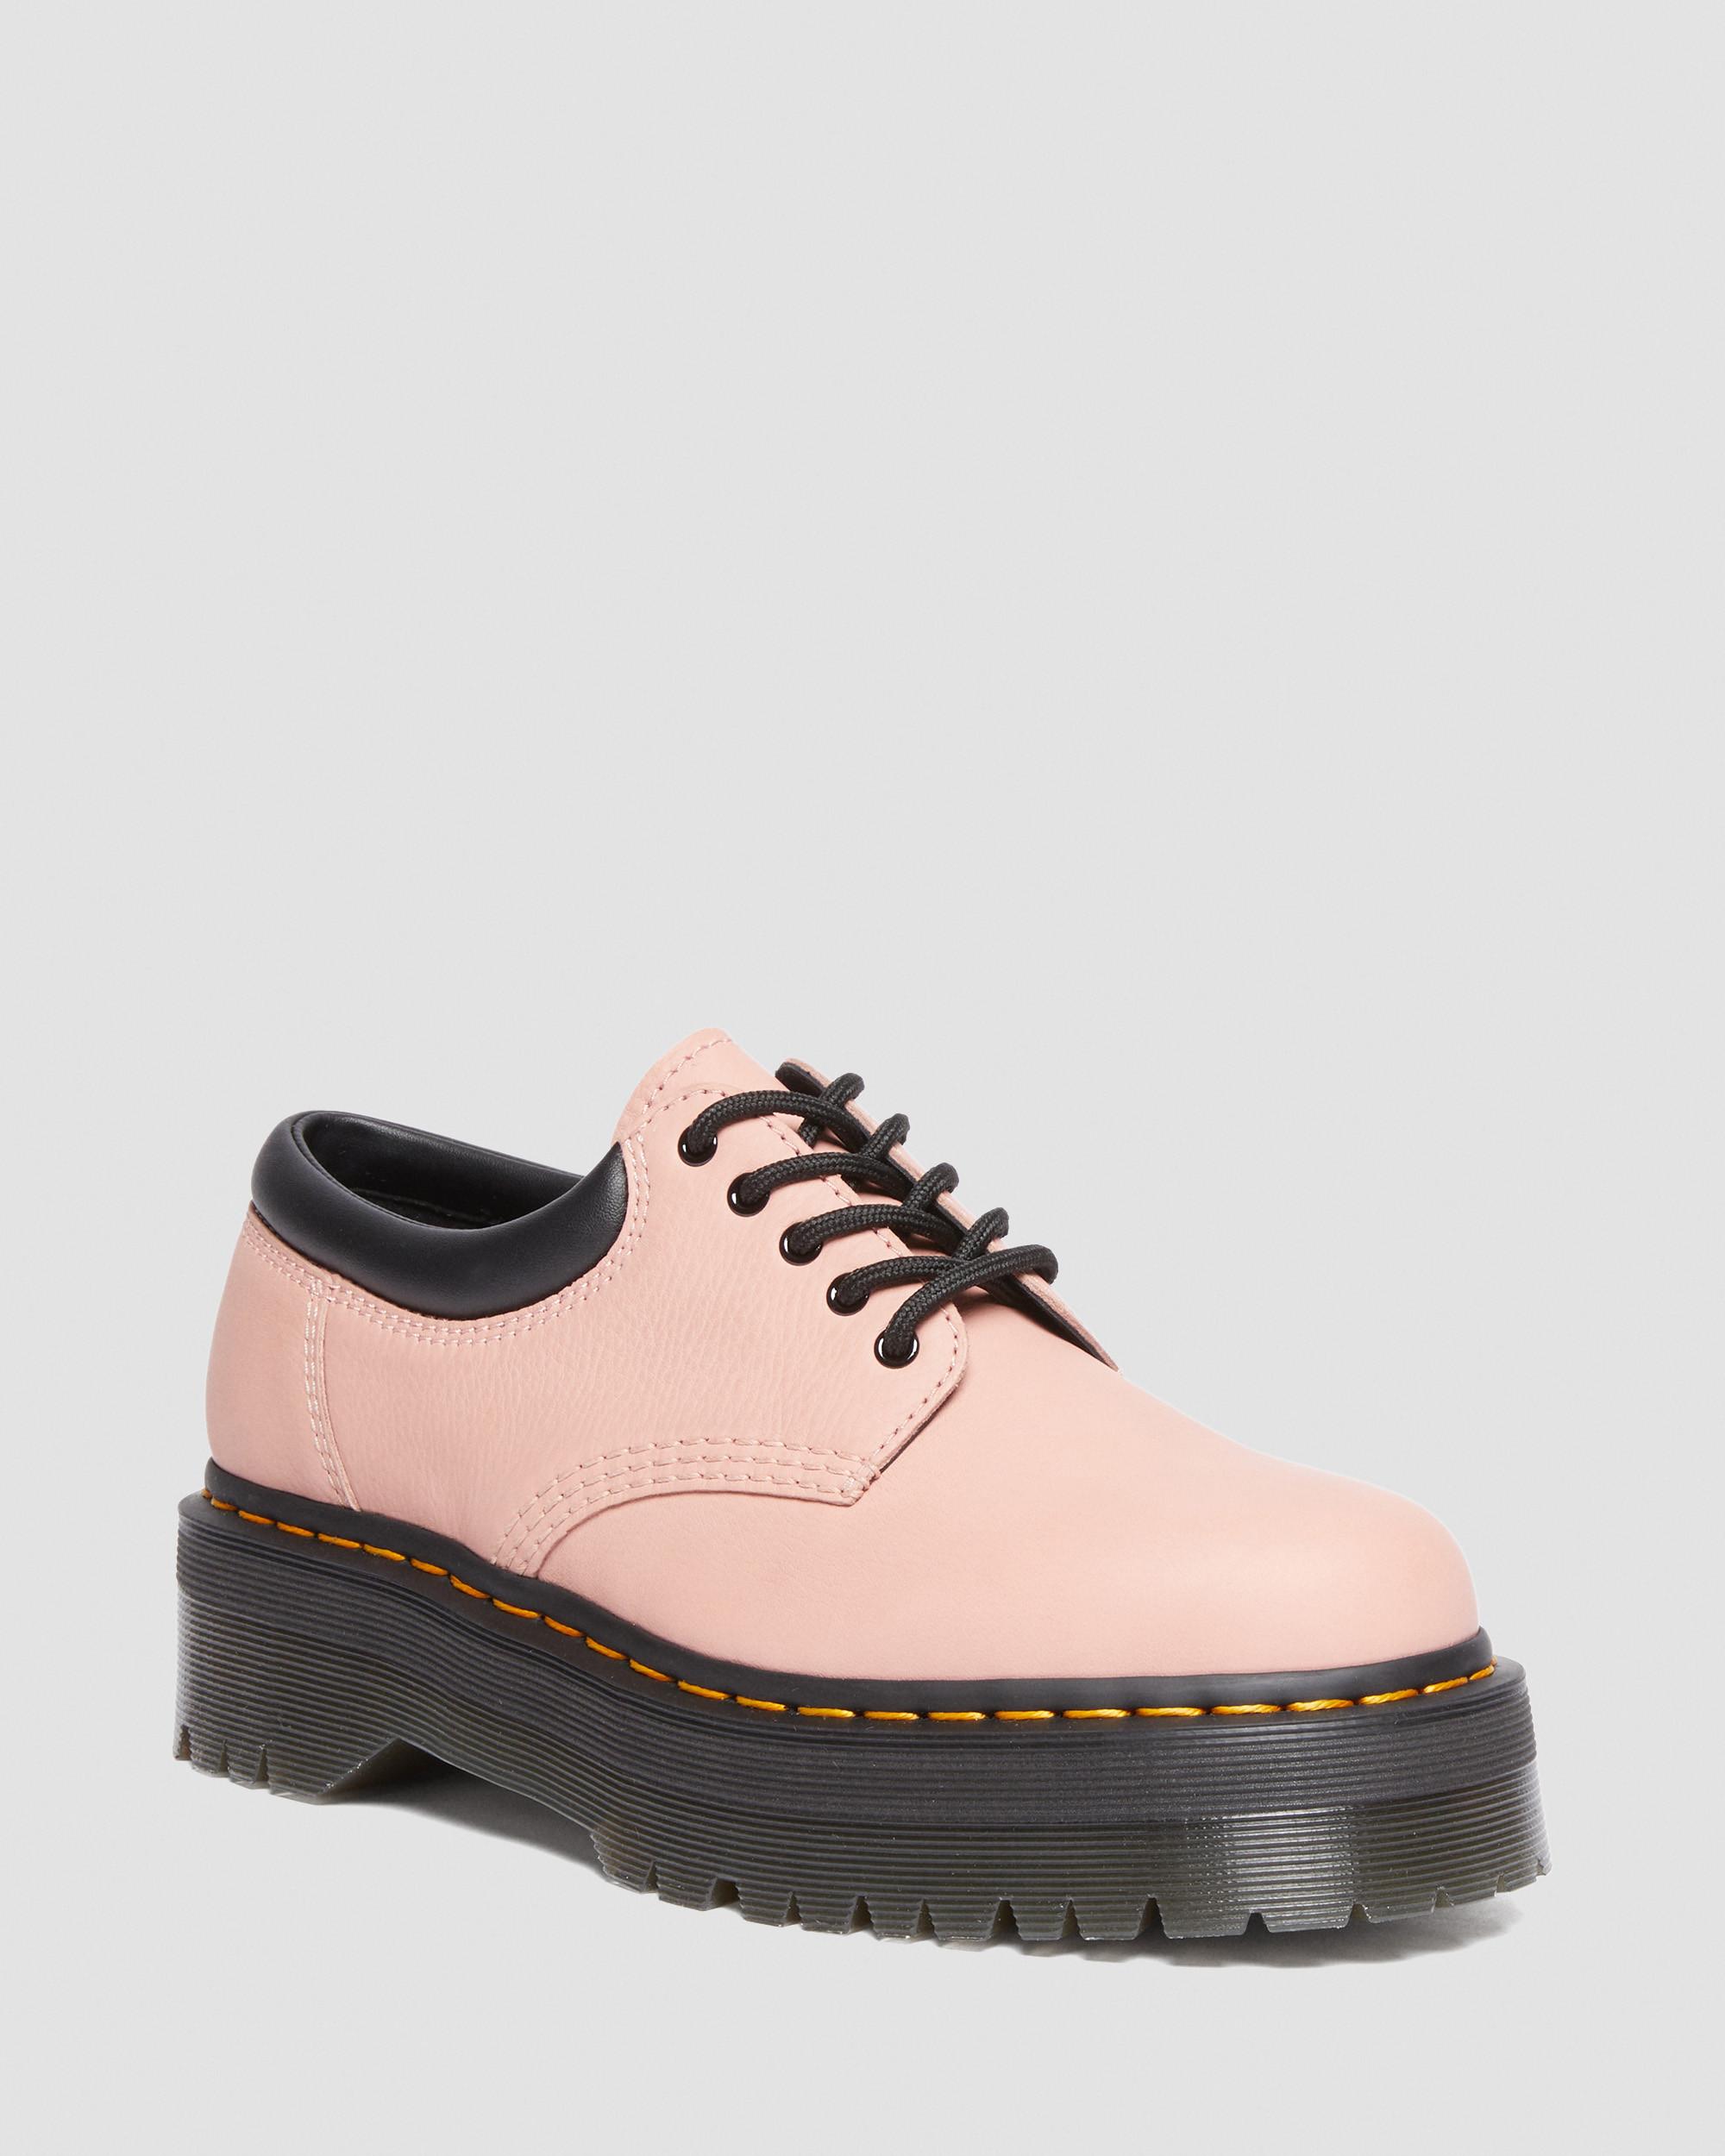 8053 Pisa Leather Platform Casual Shoes in Peach Beige | Dr. Martens